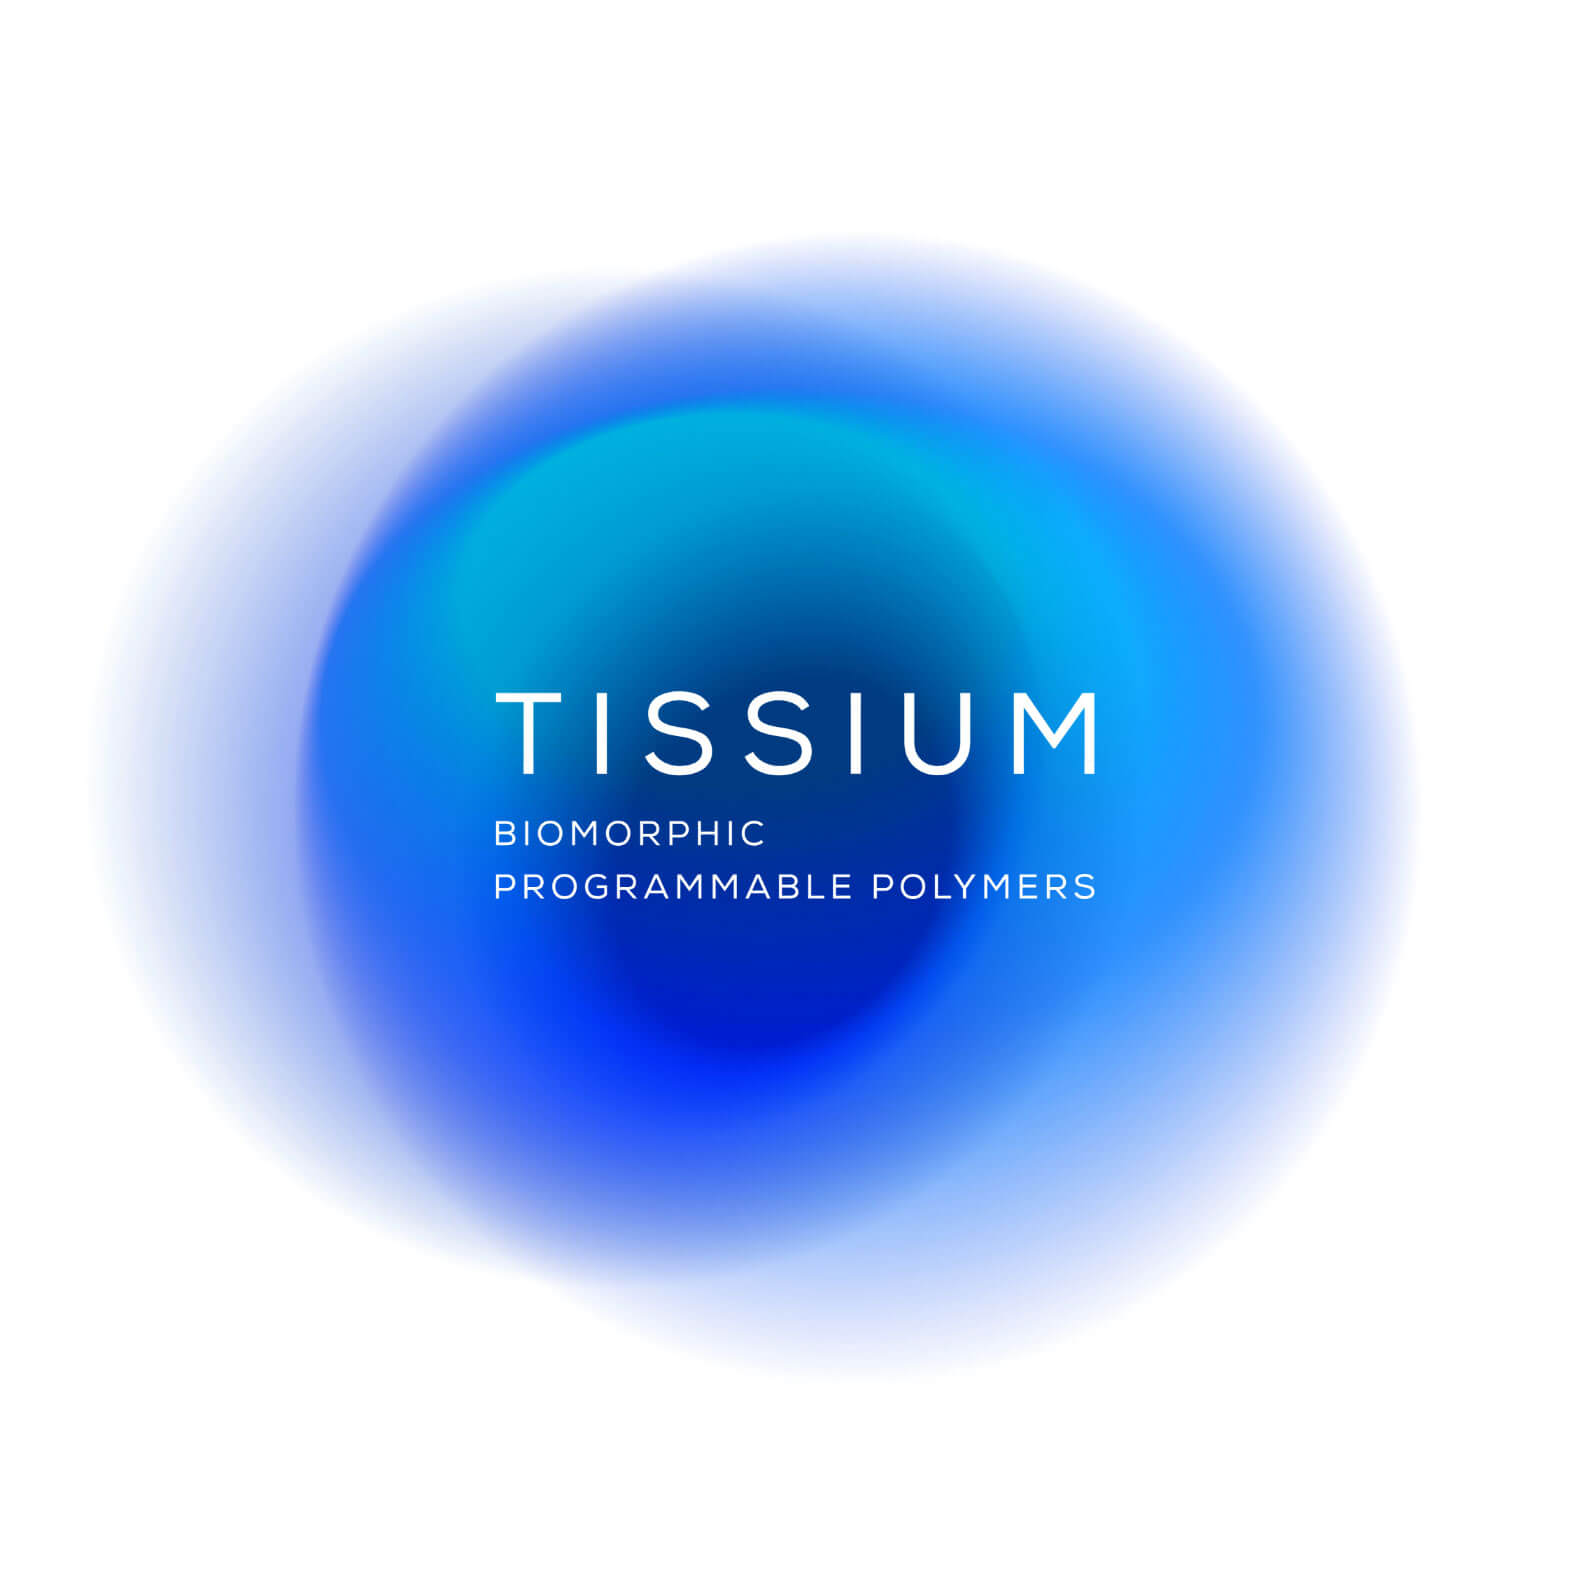 TISSIUM - Biomorphic programmable polymers